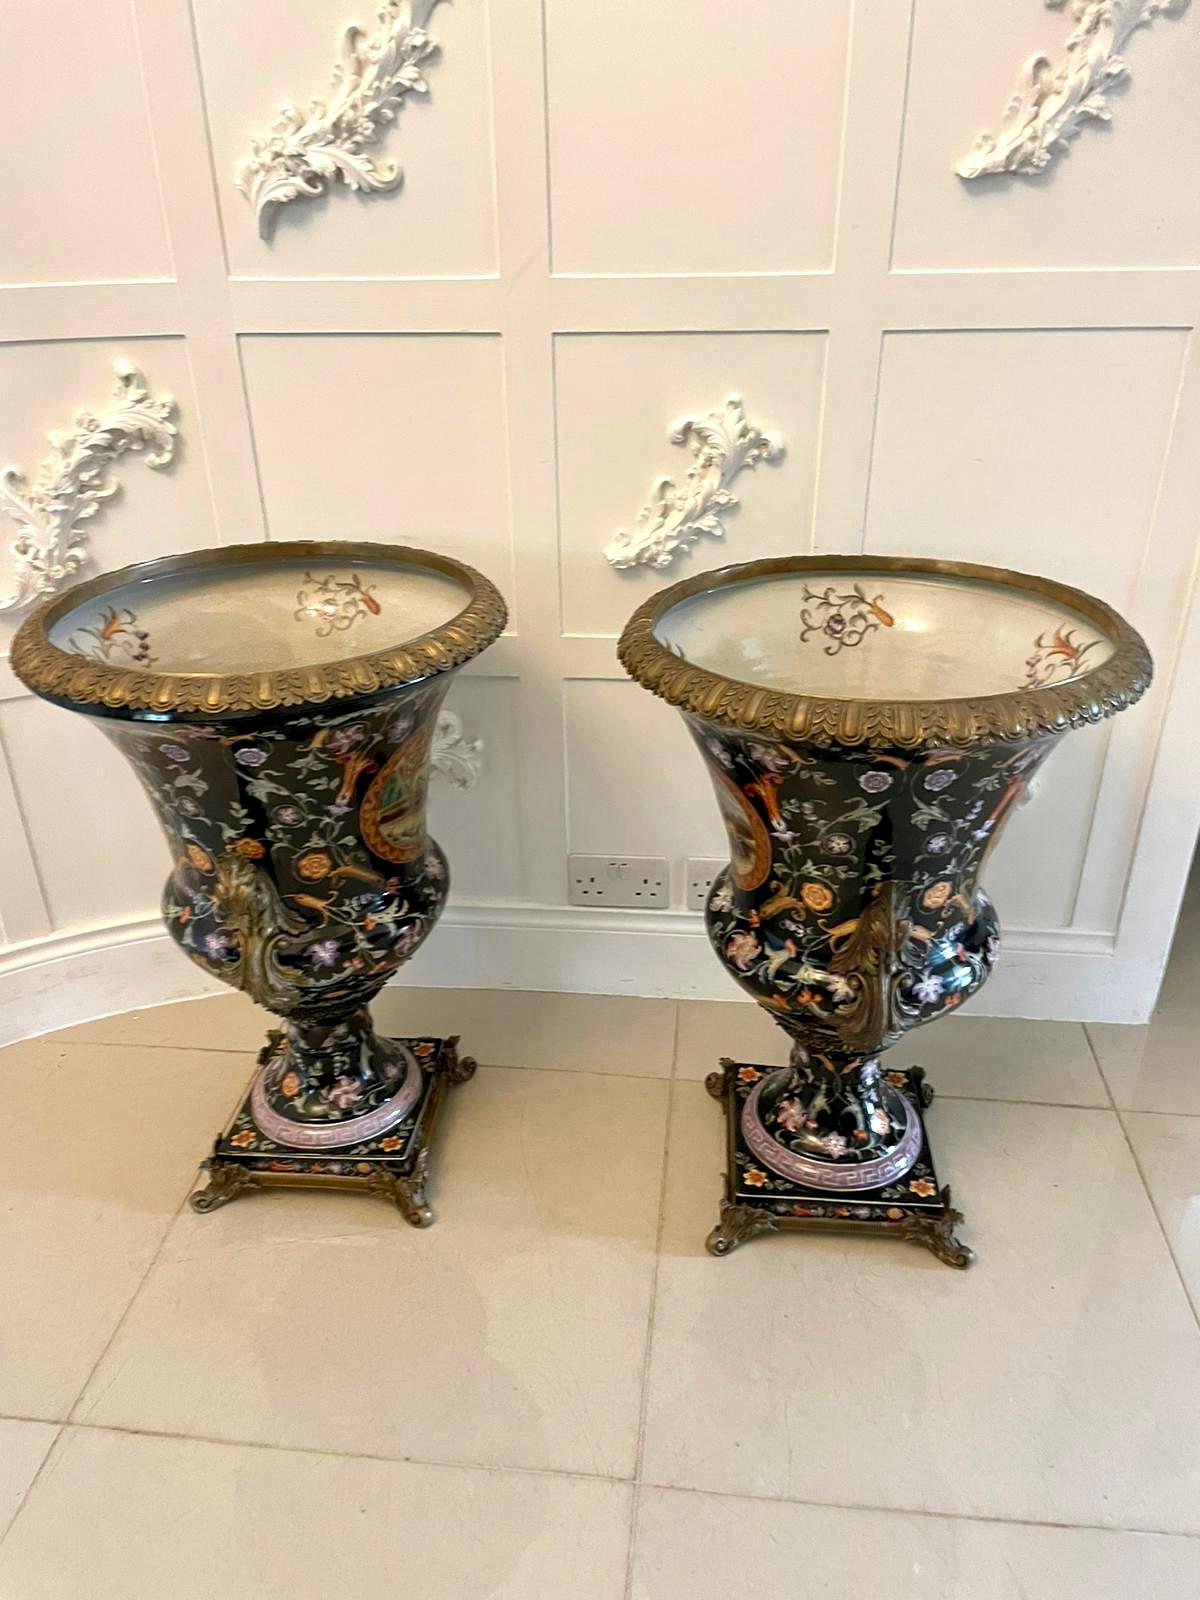 Large pair of quality antique 19th century porcelain and ornate brass mounted vases
having an ornate beautiful brass circular top with hand painted decoration to the inside of the vase above a large porcelain vase with wonderful hand painted panels